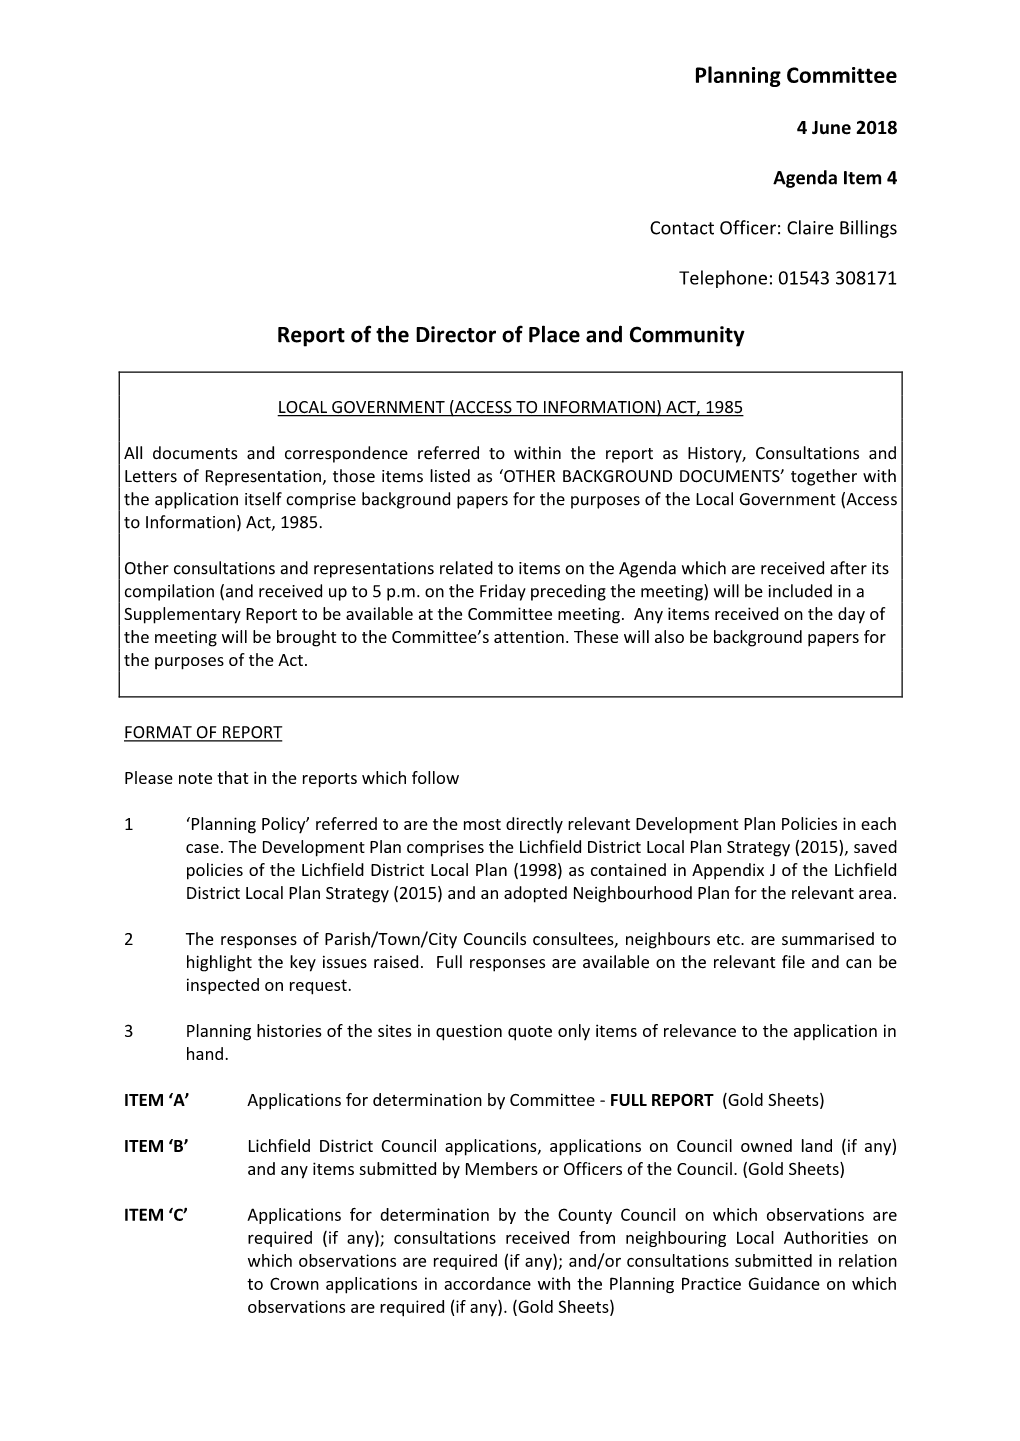 Planning Committee Report of the Director of Place and Community